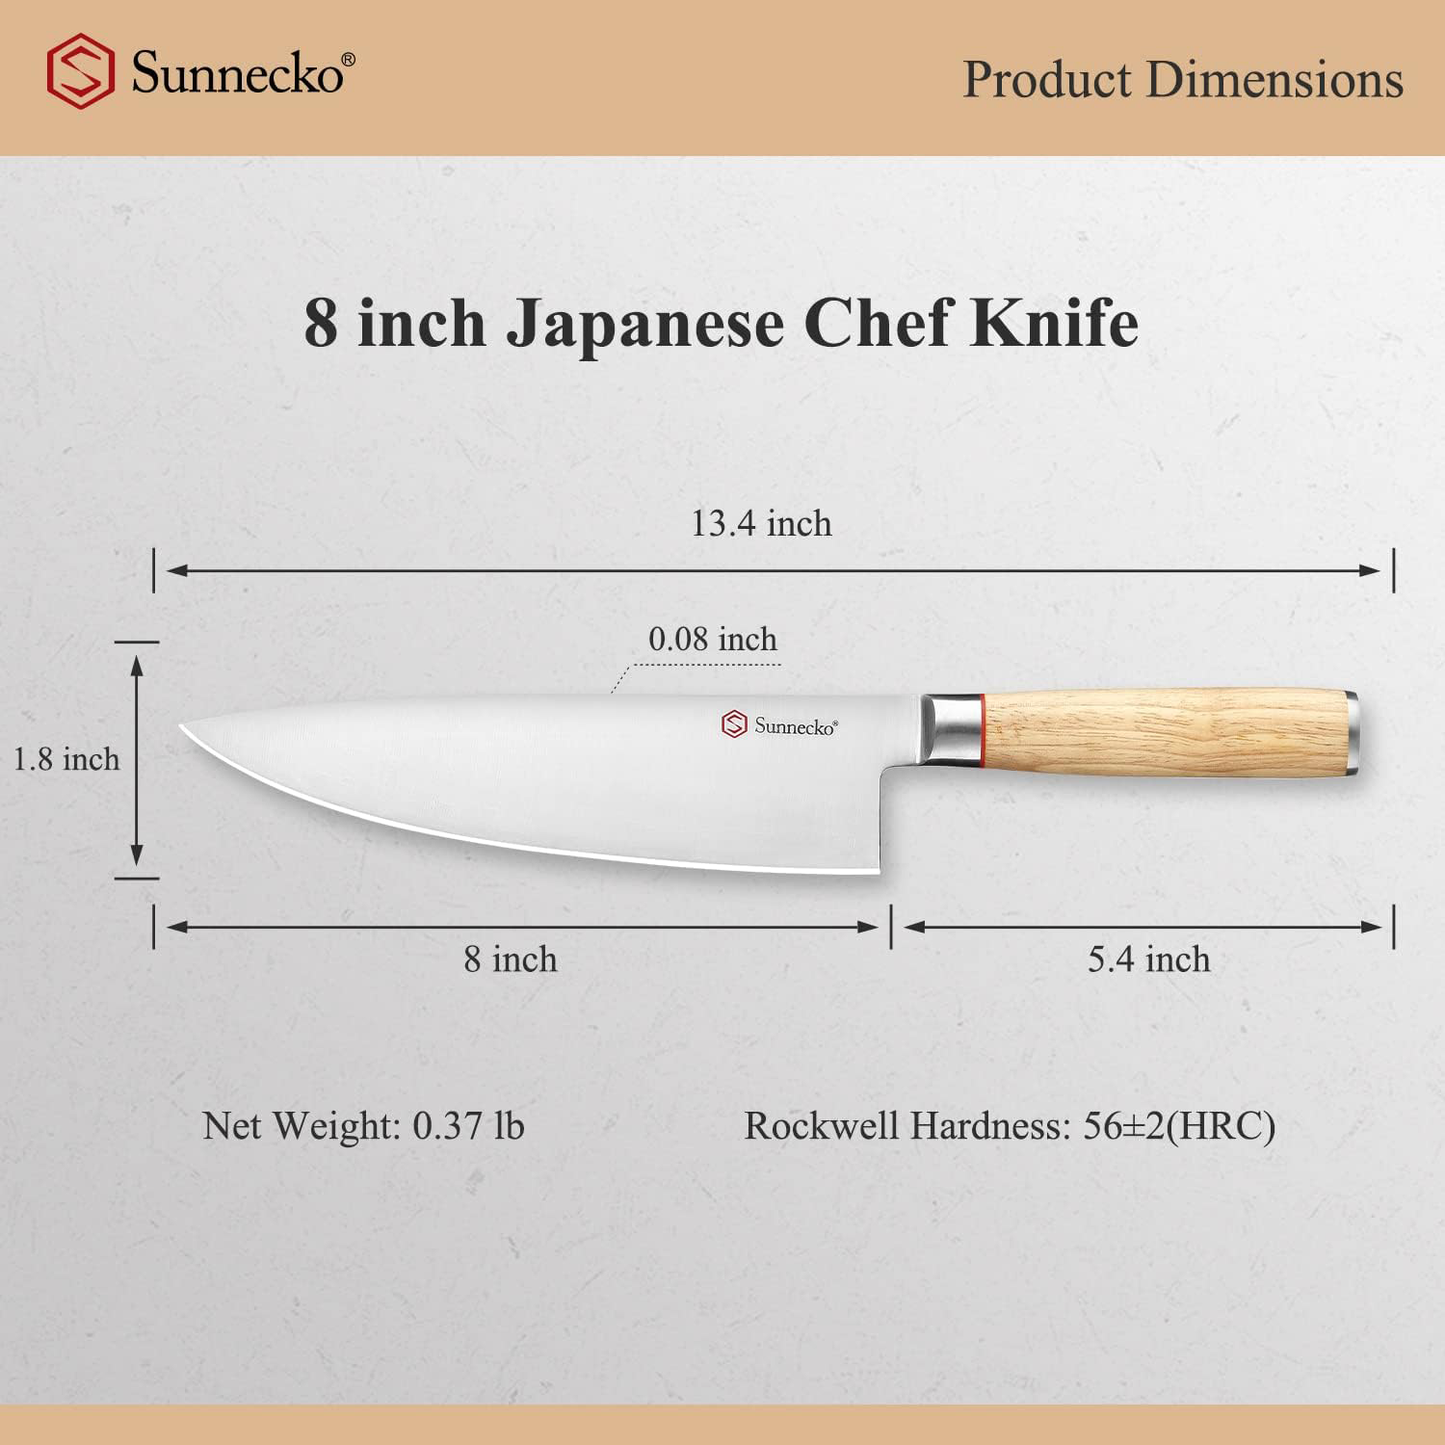 KD 8-Inch Japanese Chef Knife: Natural White Oak Handle